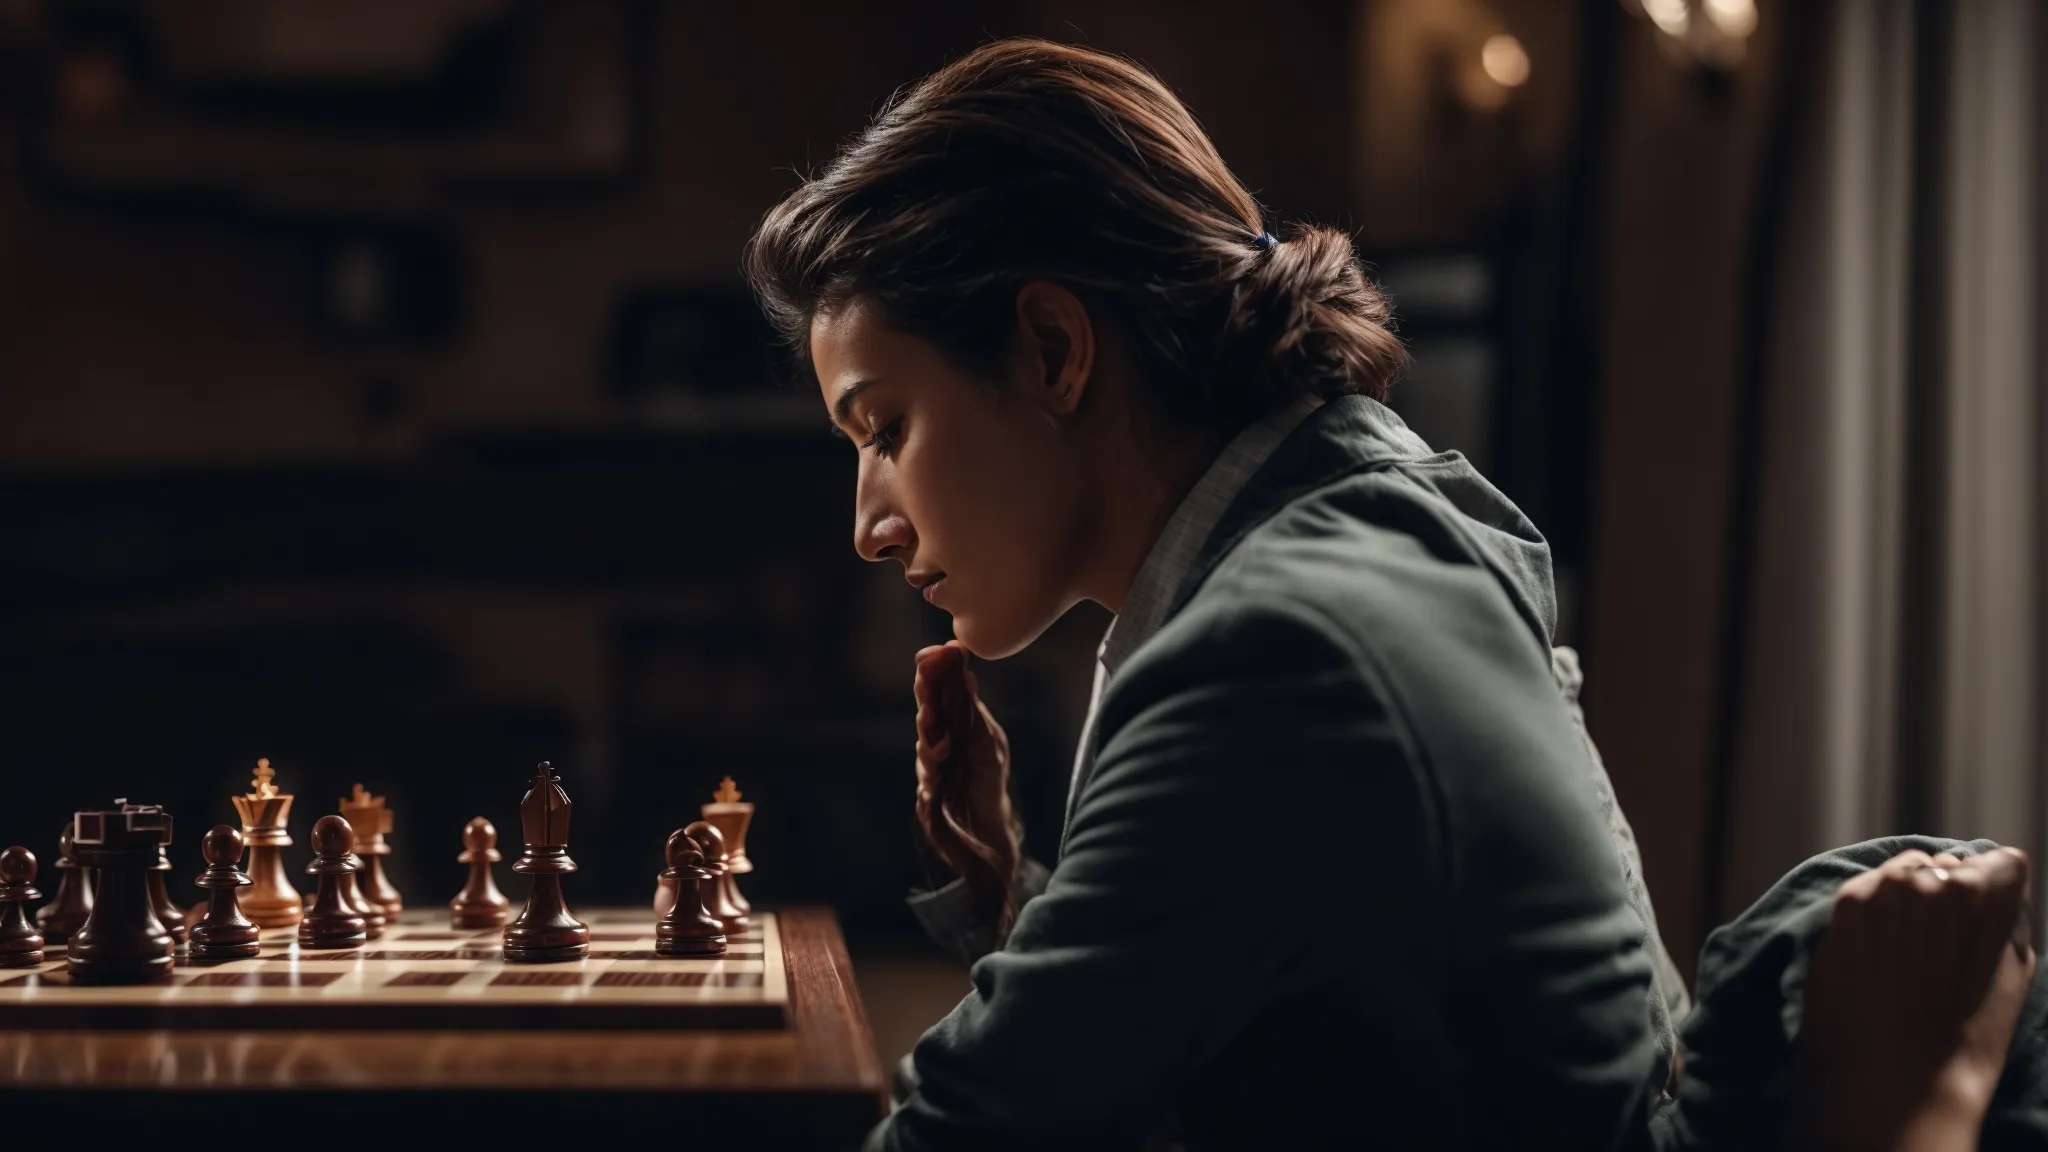 a chess player thoughtfully moves a piece on a chessboard, symbolizing strategic planning in digital competition.